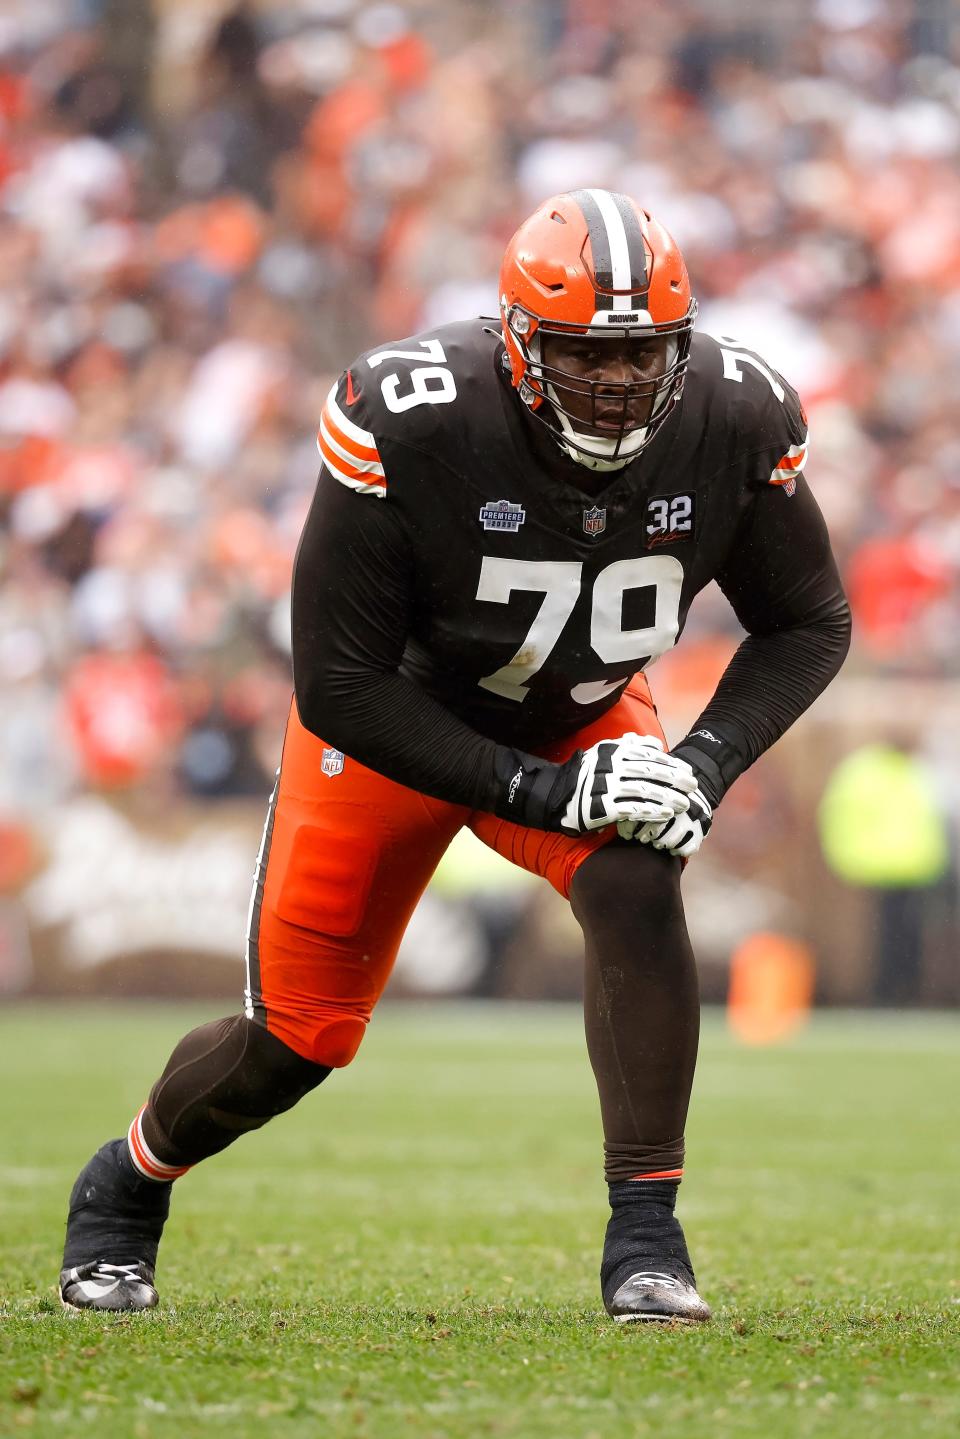 Cleveland Browns offensive tackle Dawand Jones (79) lines up for a play against the Cincinnati Bengals on Sunday in Cleveland.